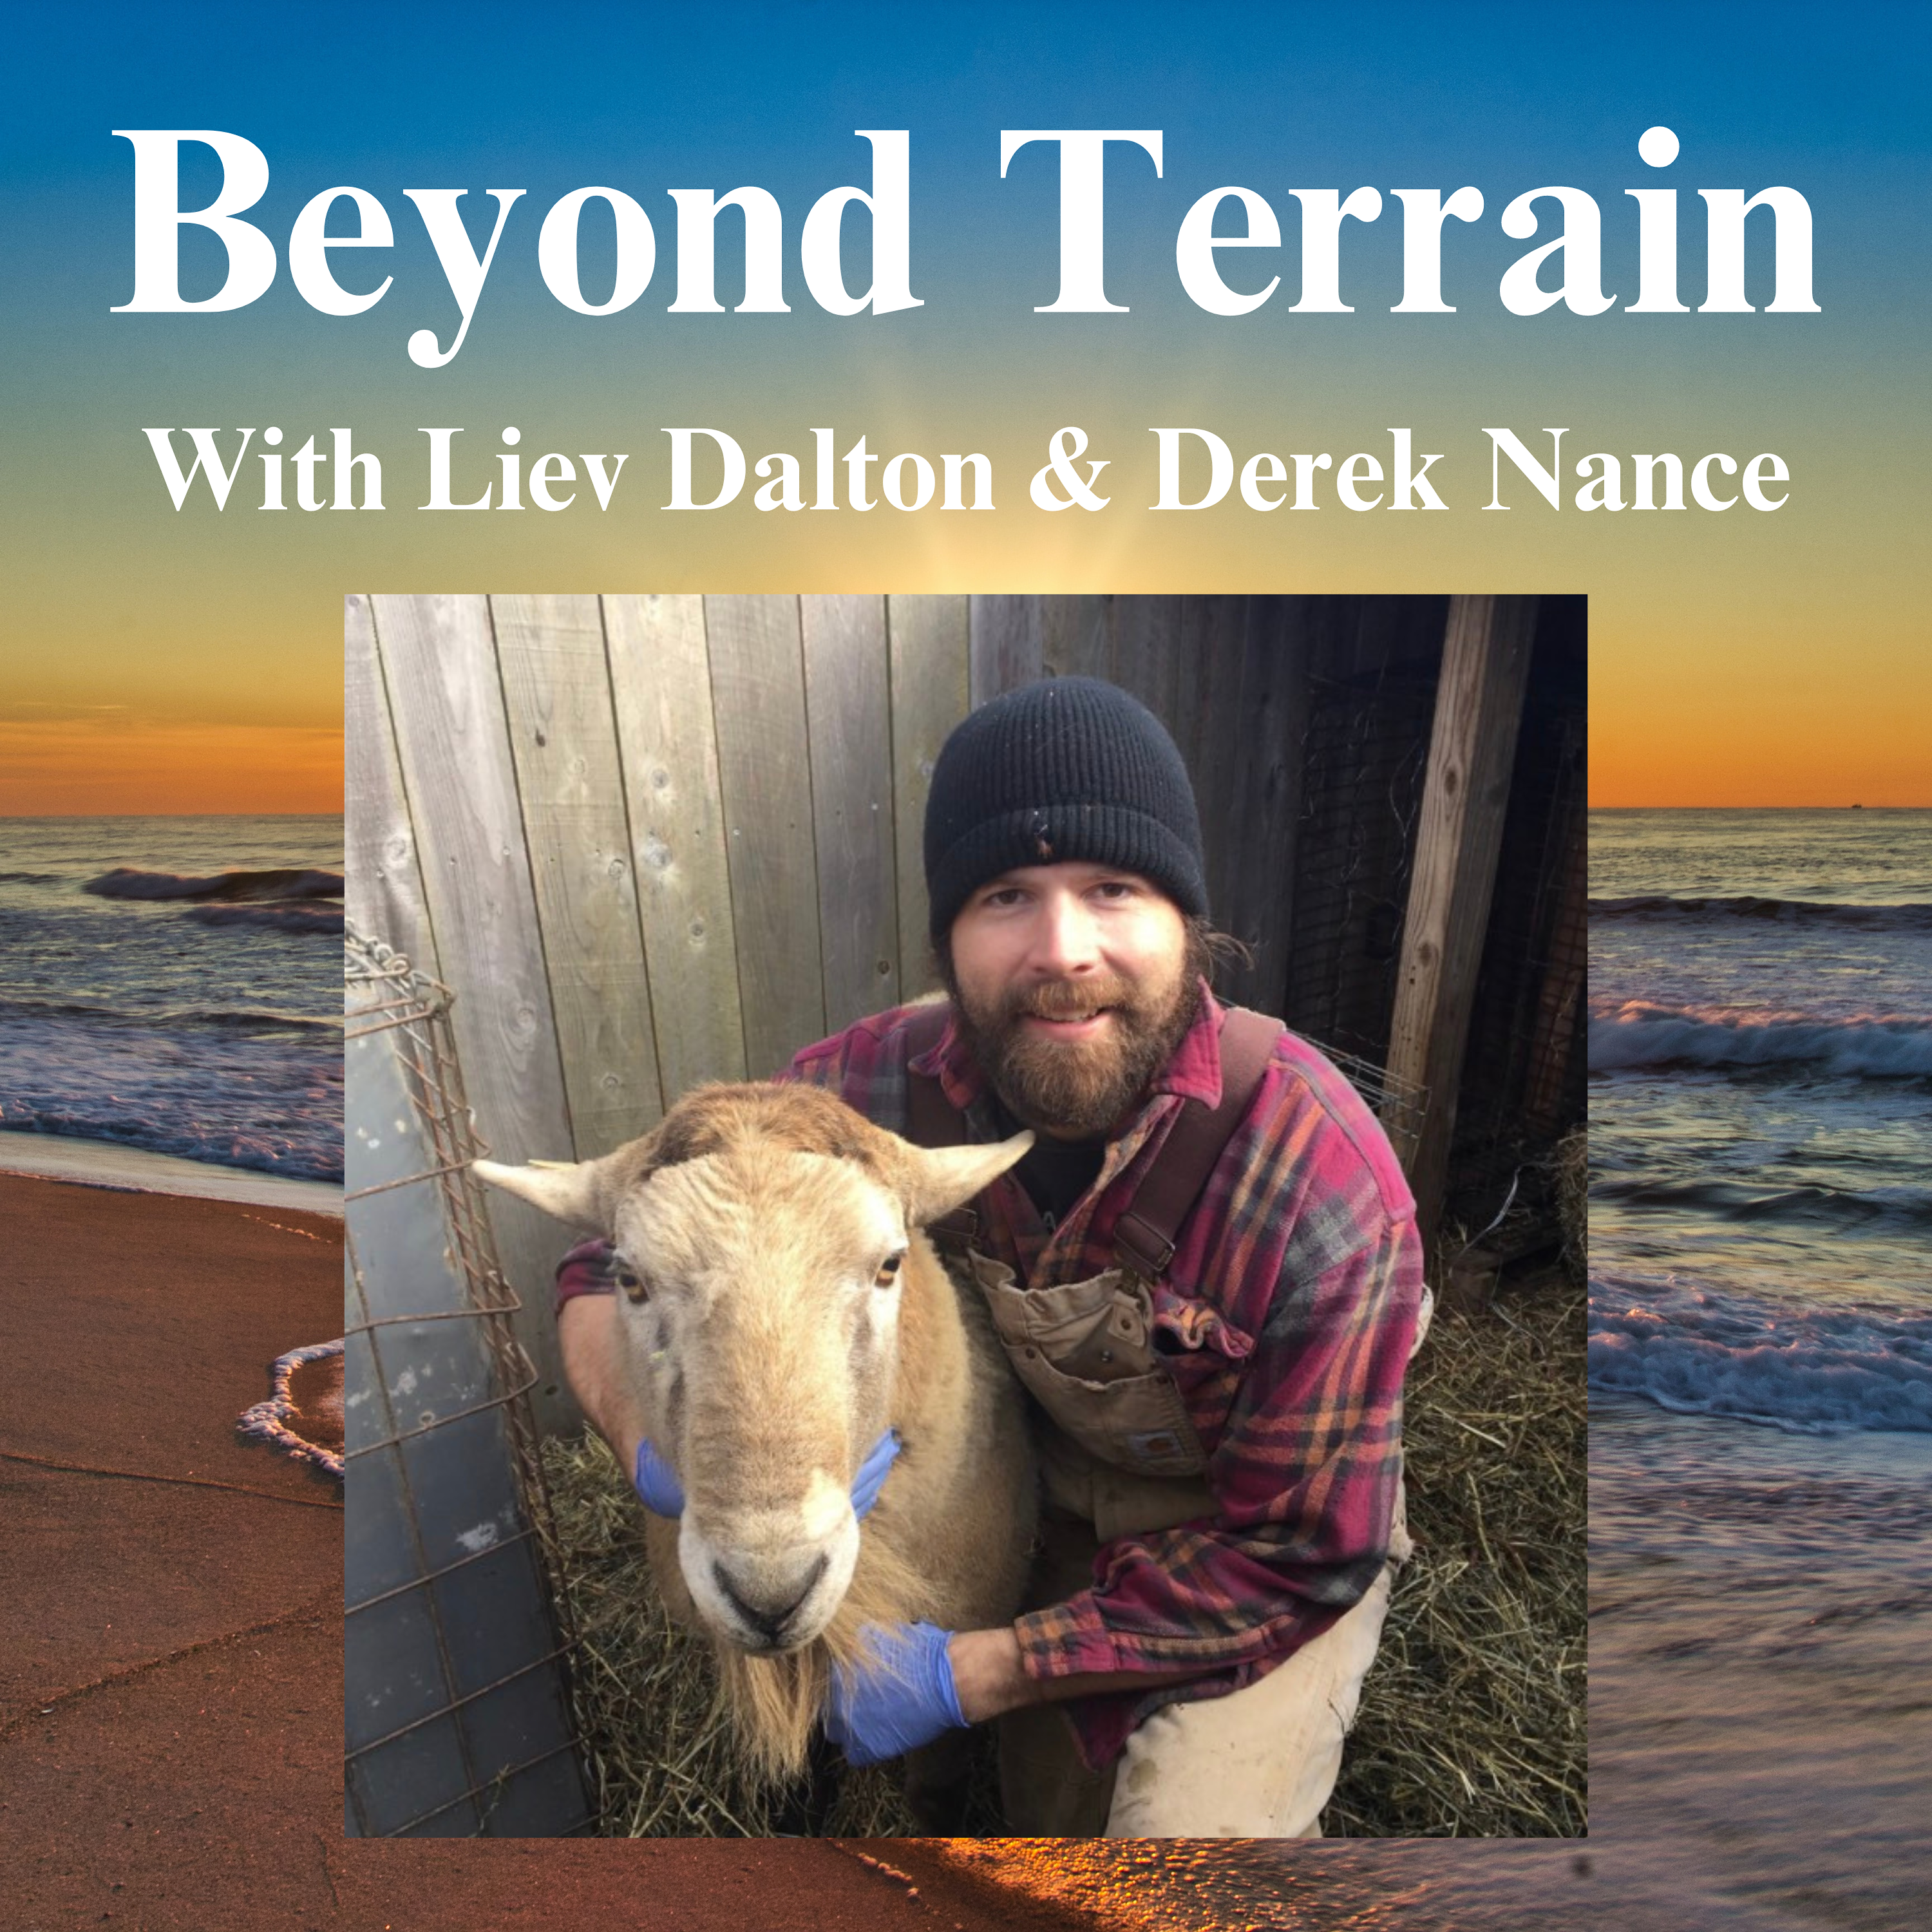 Derek Nance on Navigating the Health Field, Eating Nose to Tail, Broken Food systems, and the Terrain Model of Health